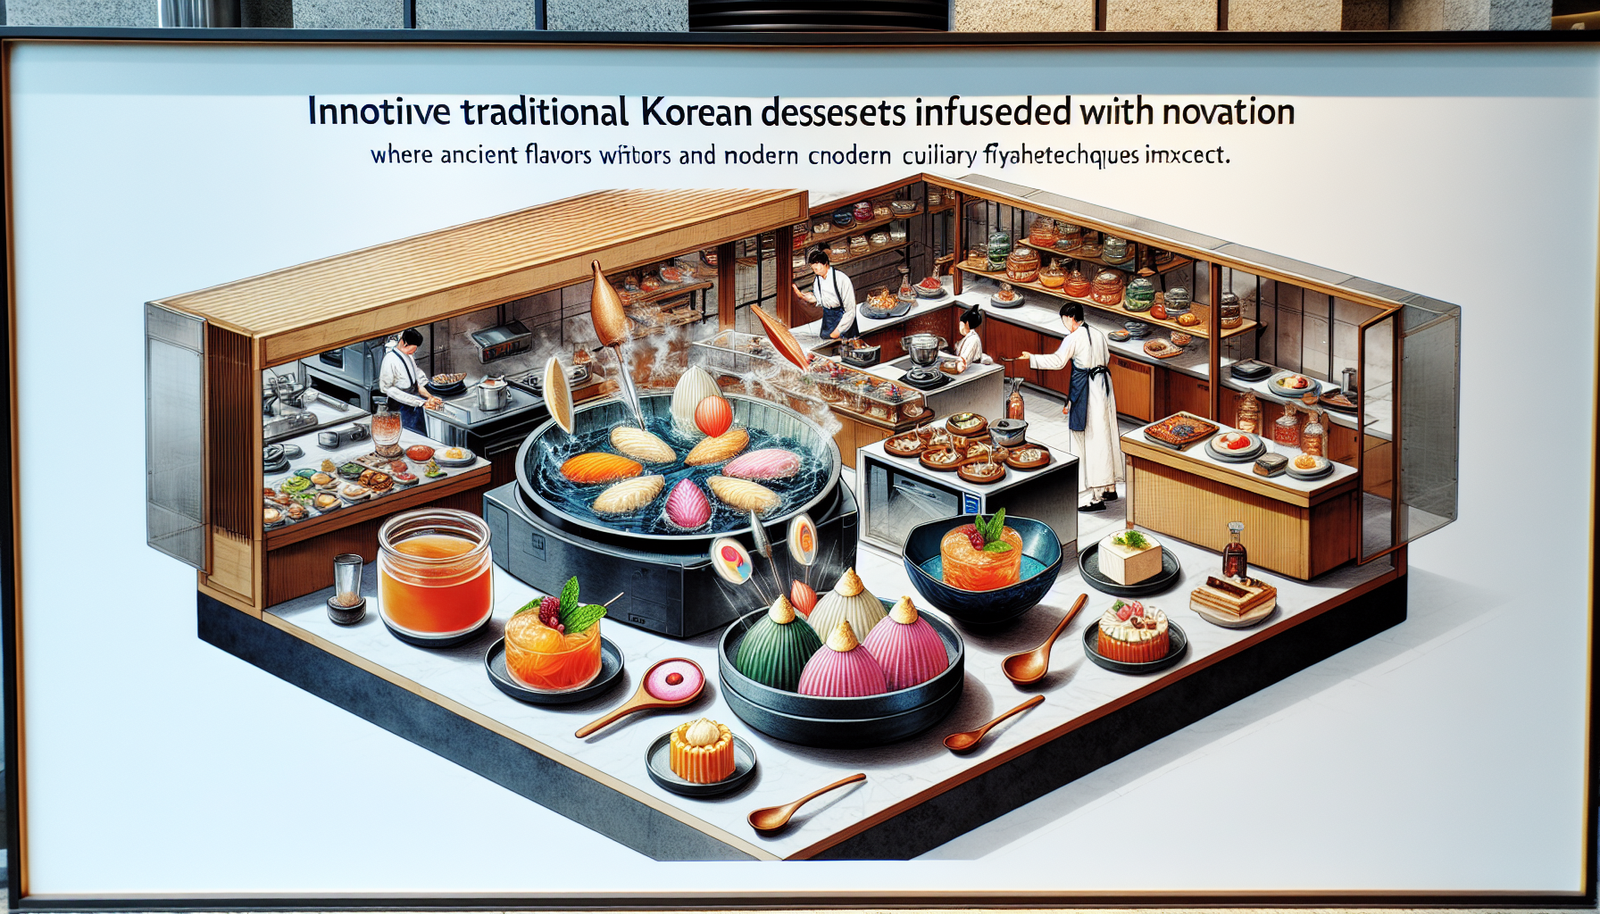 What Are Some Avant-garde Techniques Applied To Traditional Korean Desserts?